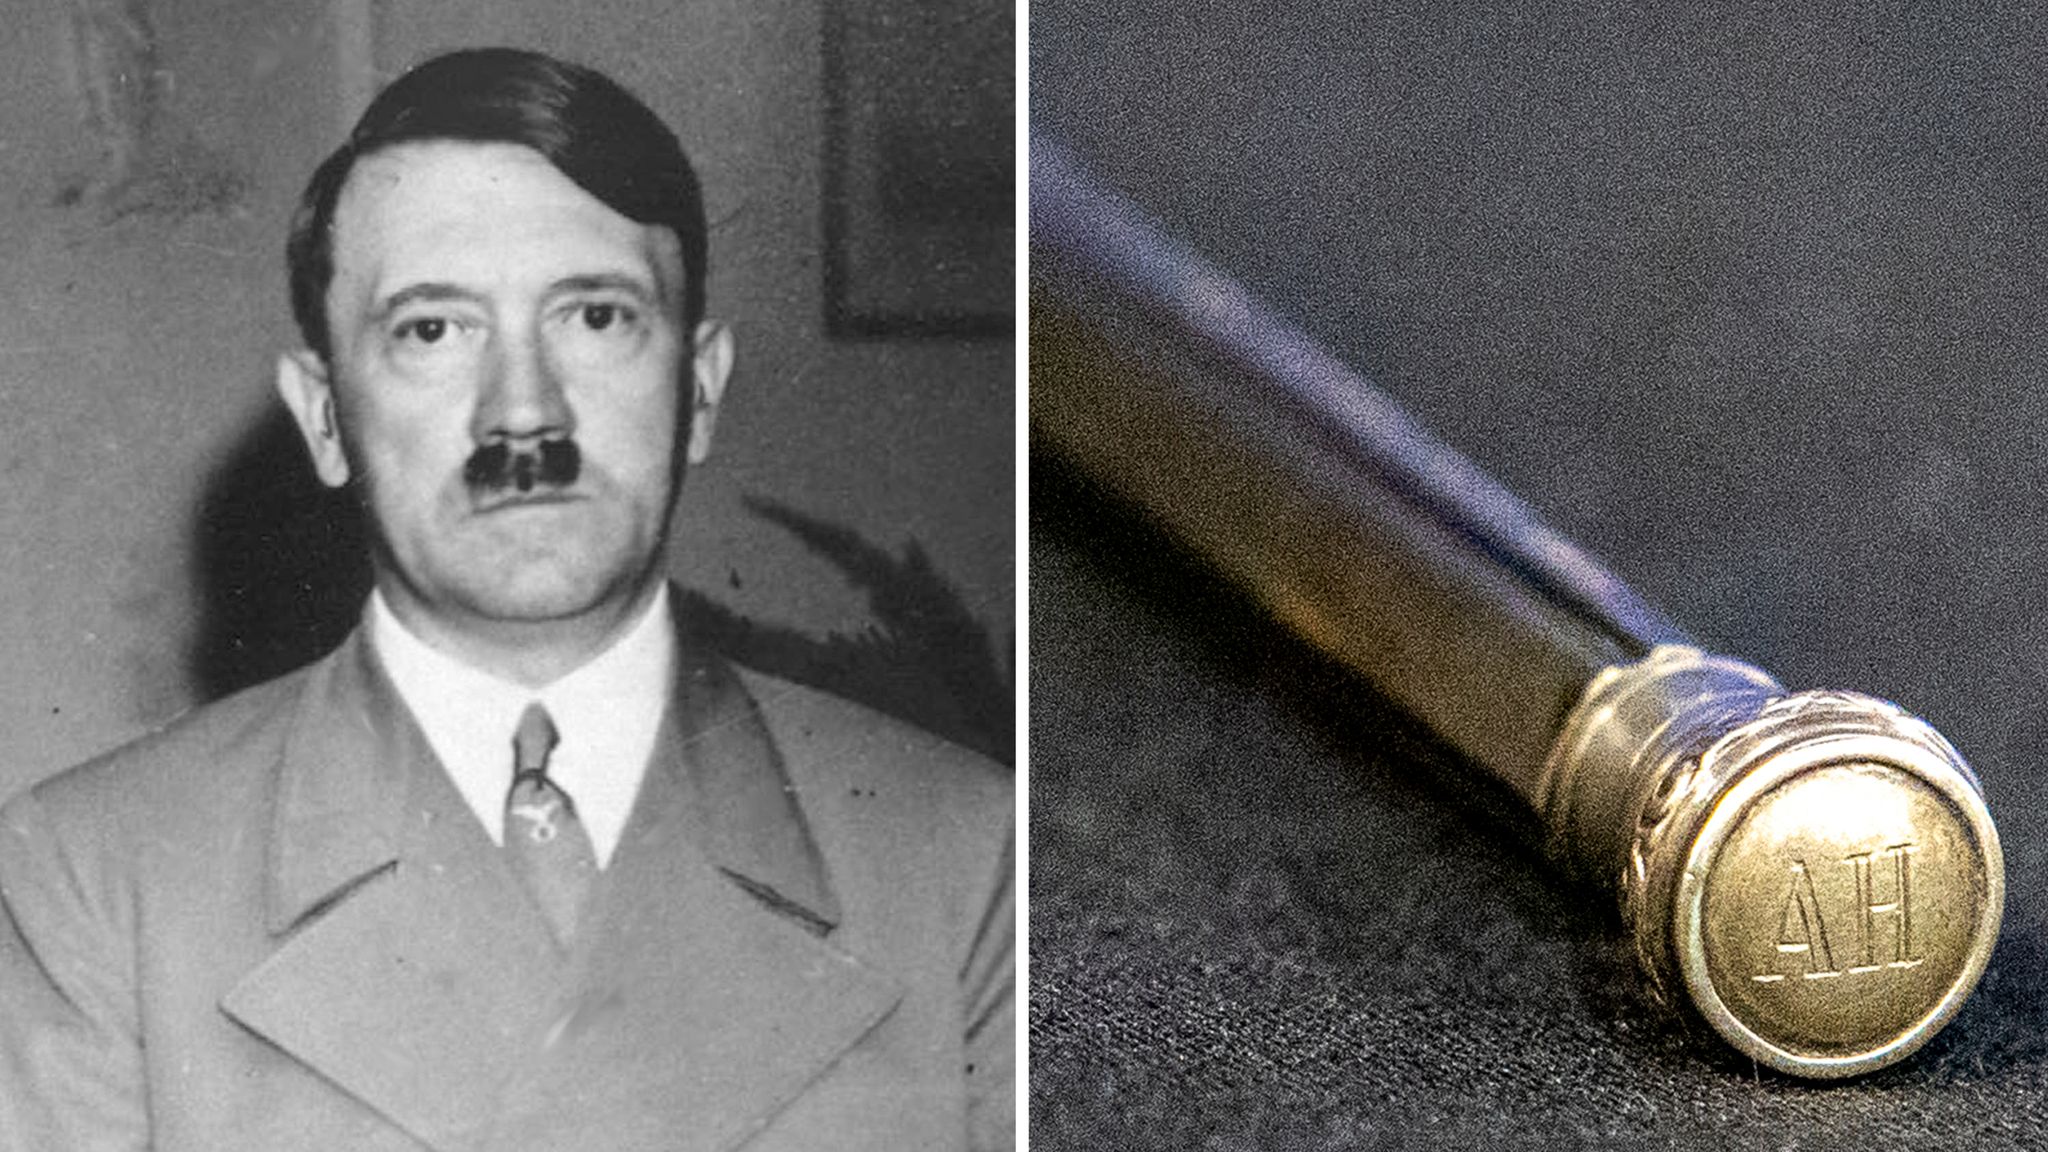 Pencil believed to have belonged to Adolf Hitler sells for more than £5,000  in Belfast auction | UK News | Sky News